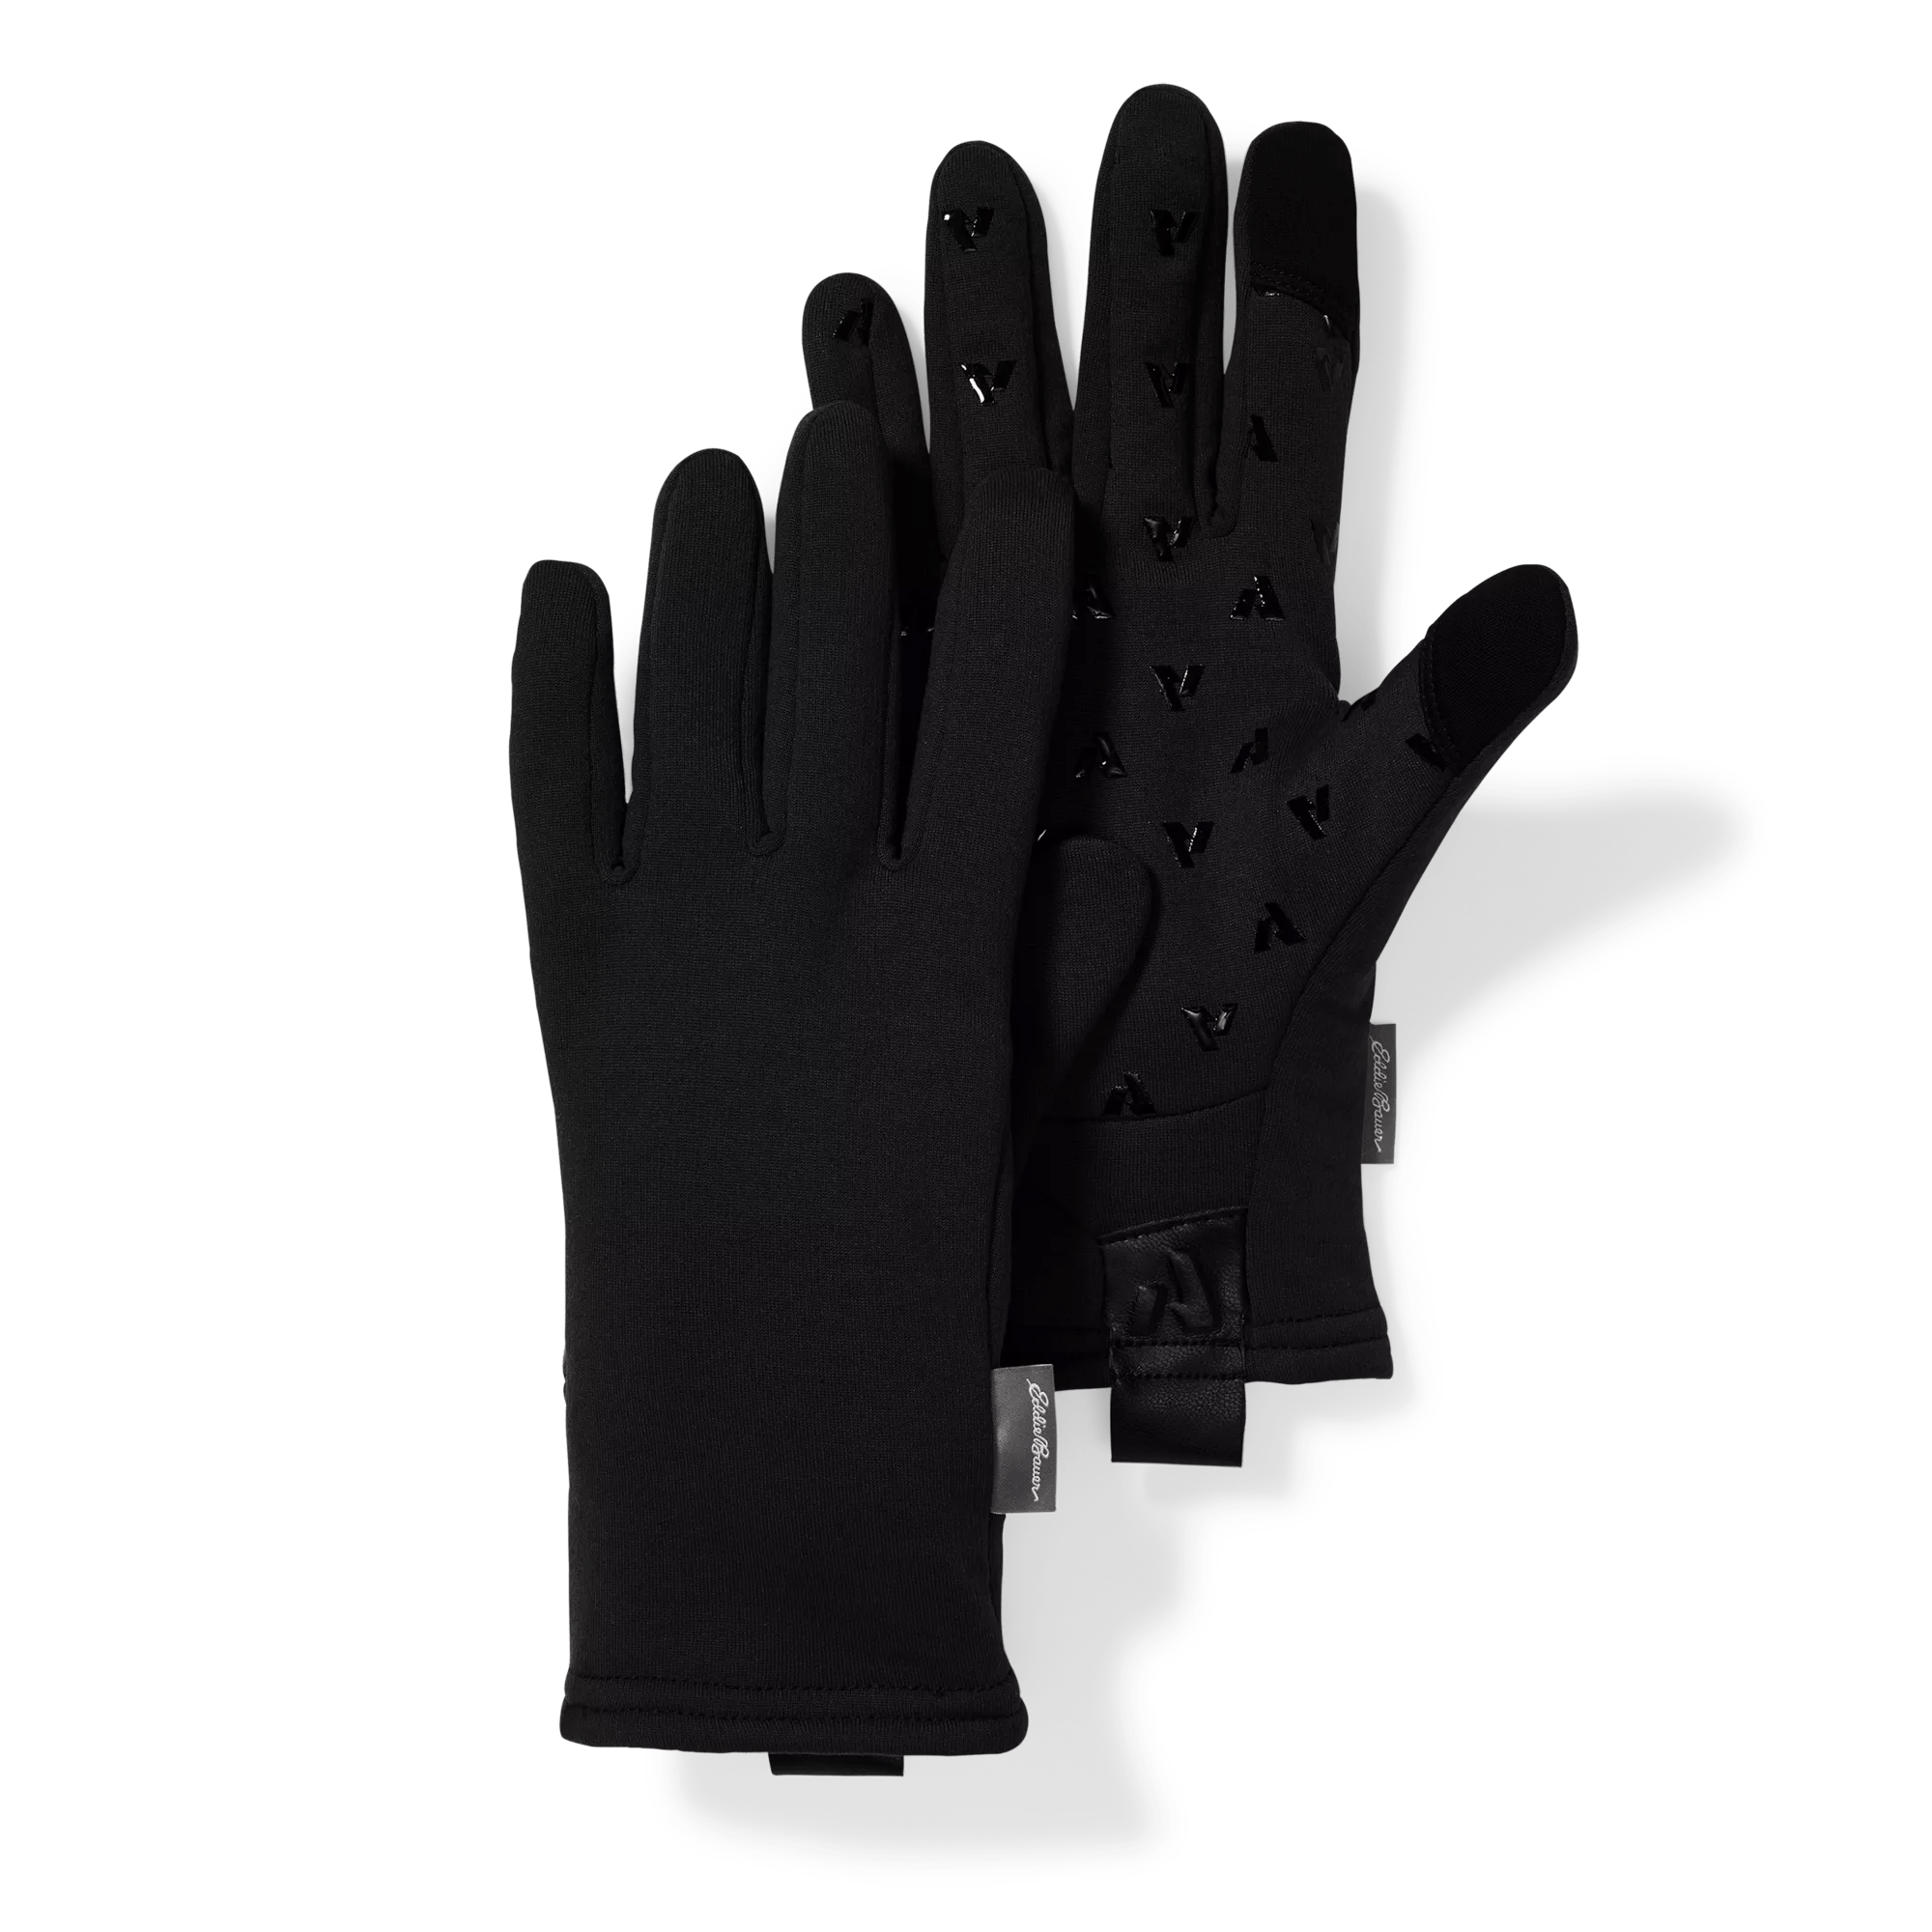 Guide Pro Glove Liners